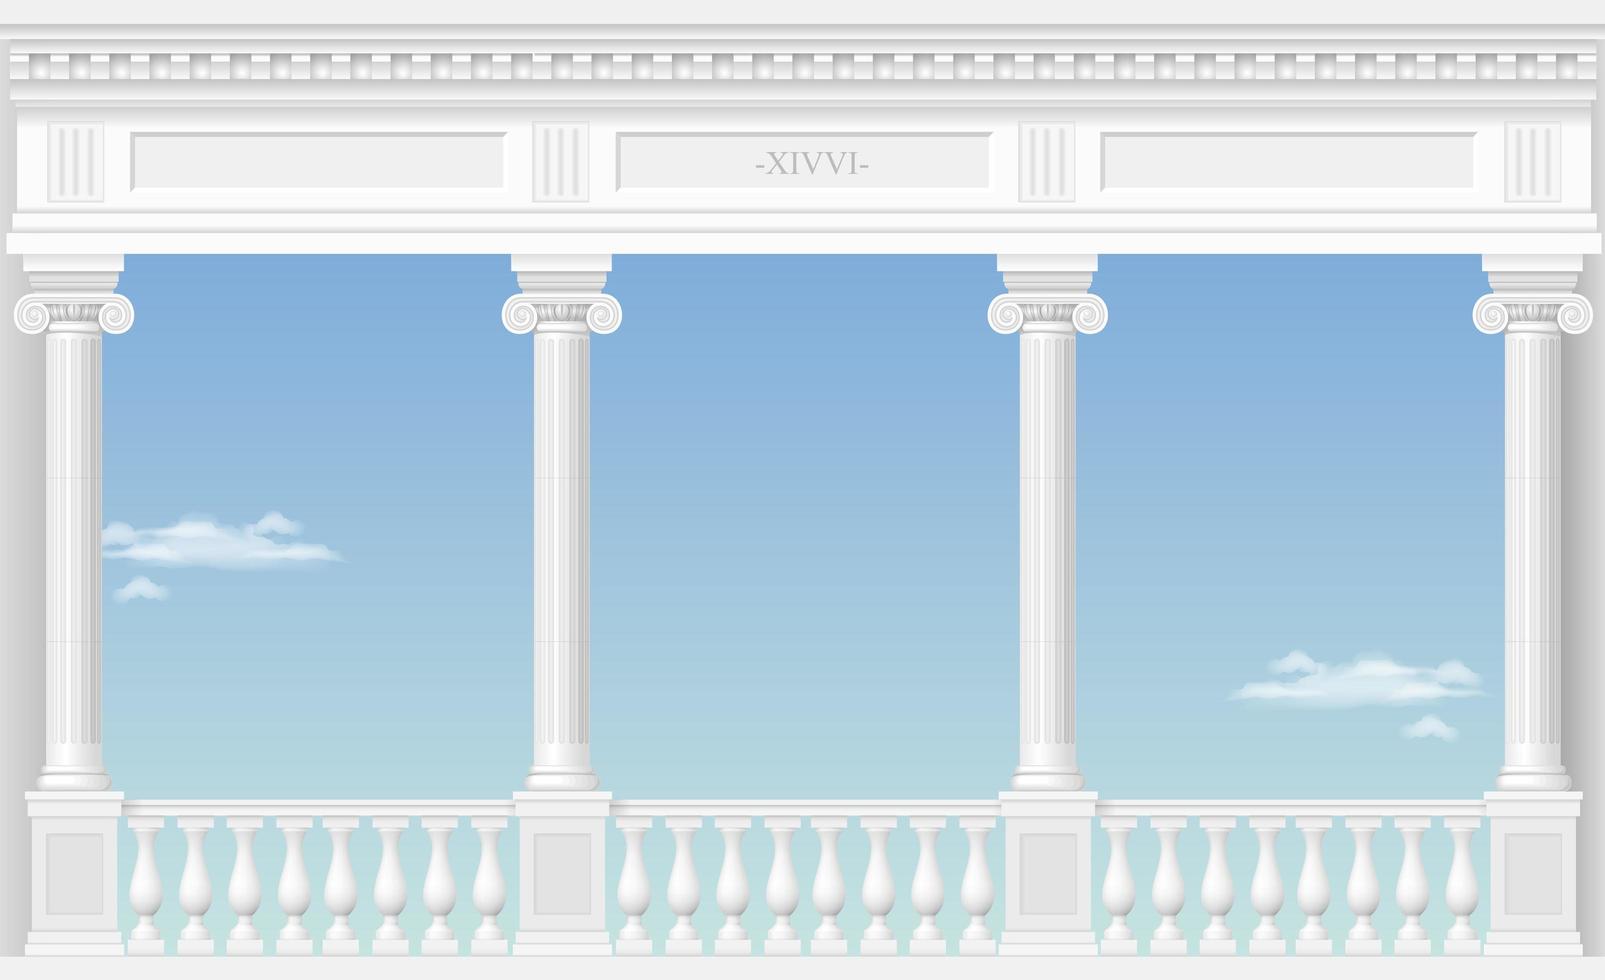 Balcony of a fabulous palace with cloud view vector